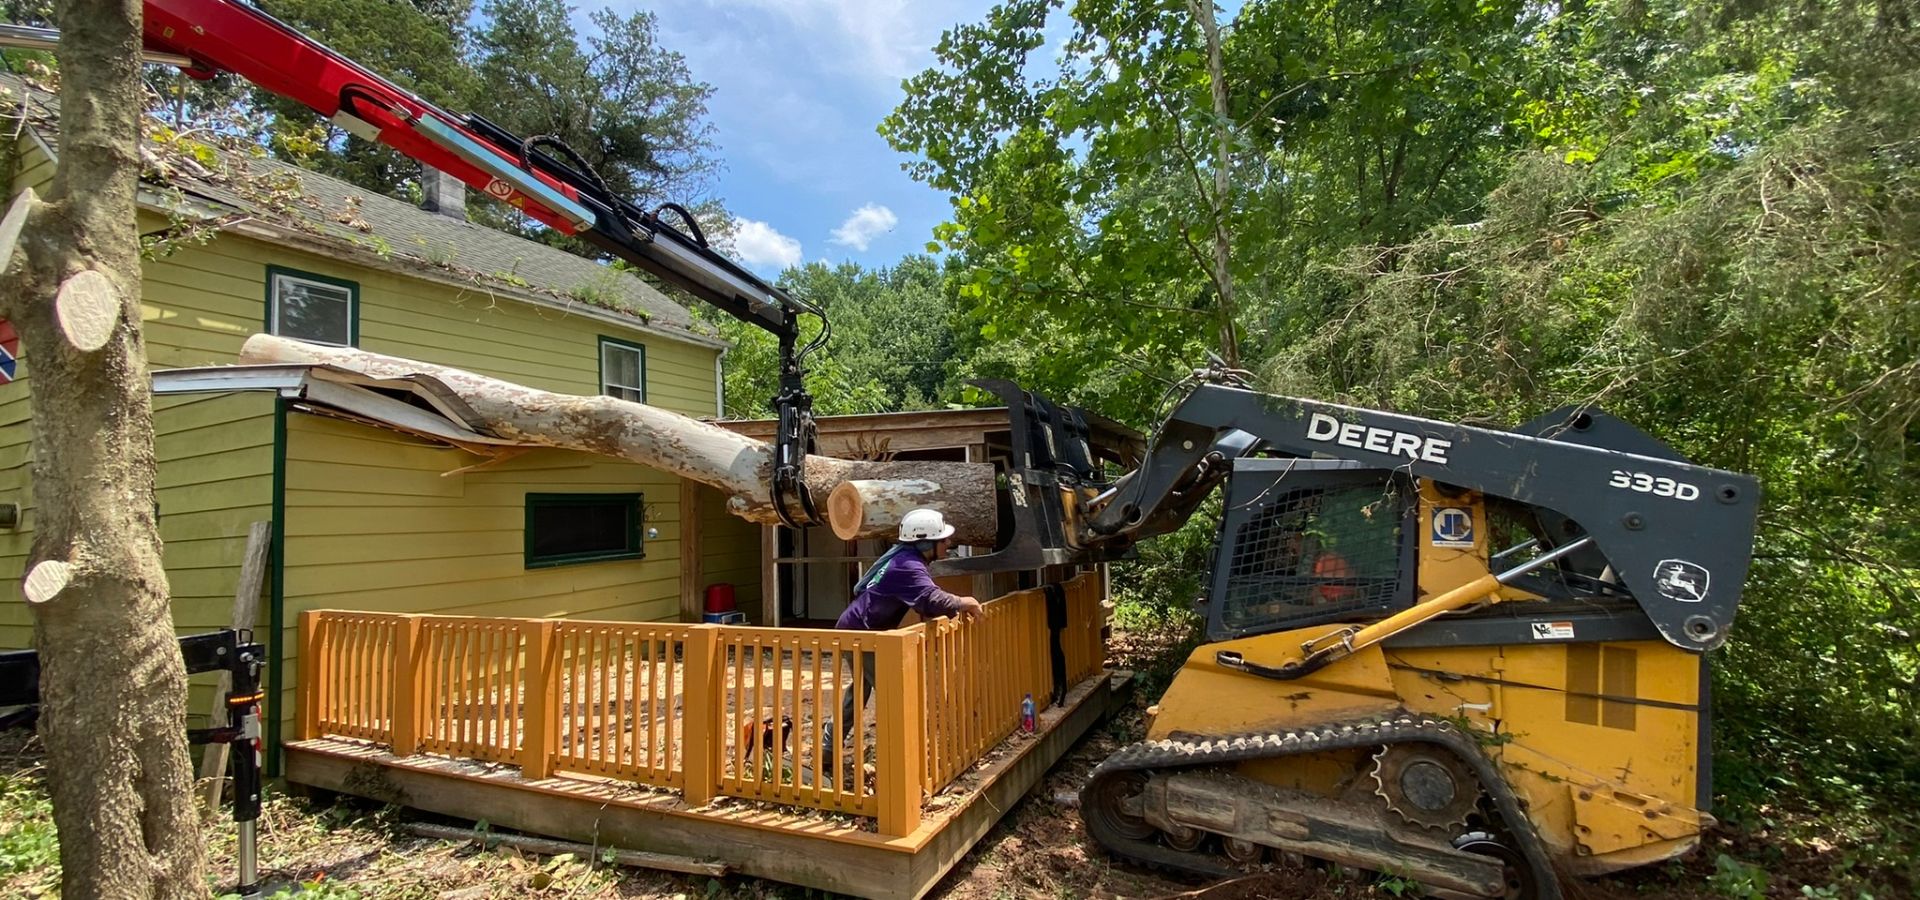 A yellow and black skid steer lifts a large section of fallen tree that’s fallen on a house and deck with some help from a grapple arm on a knuckle boom.